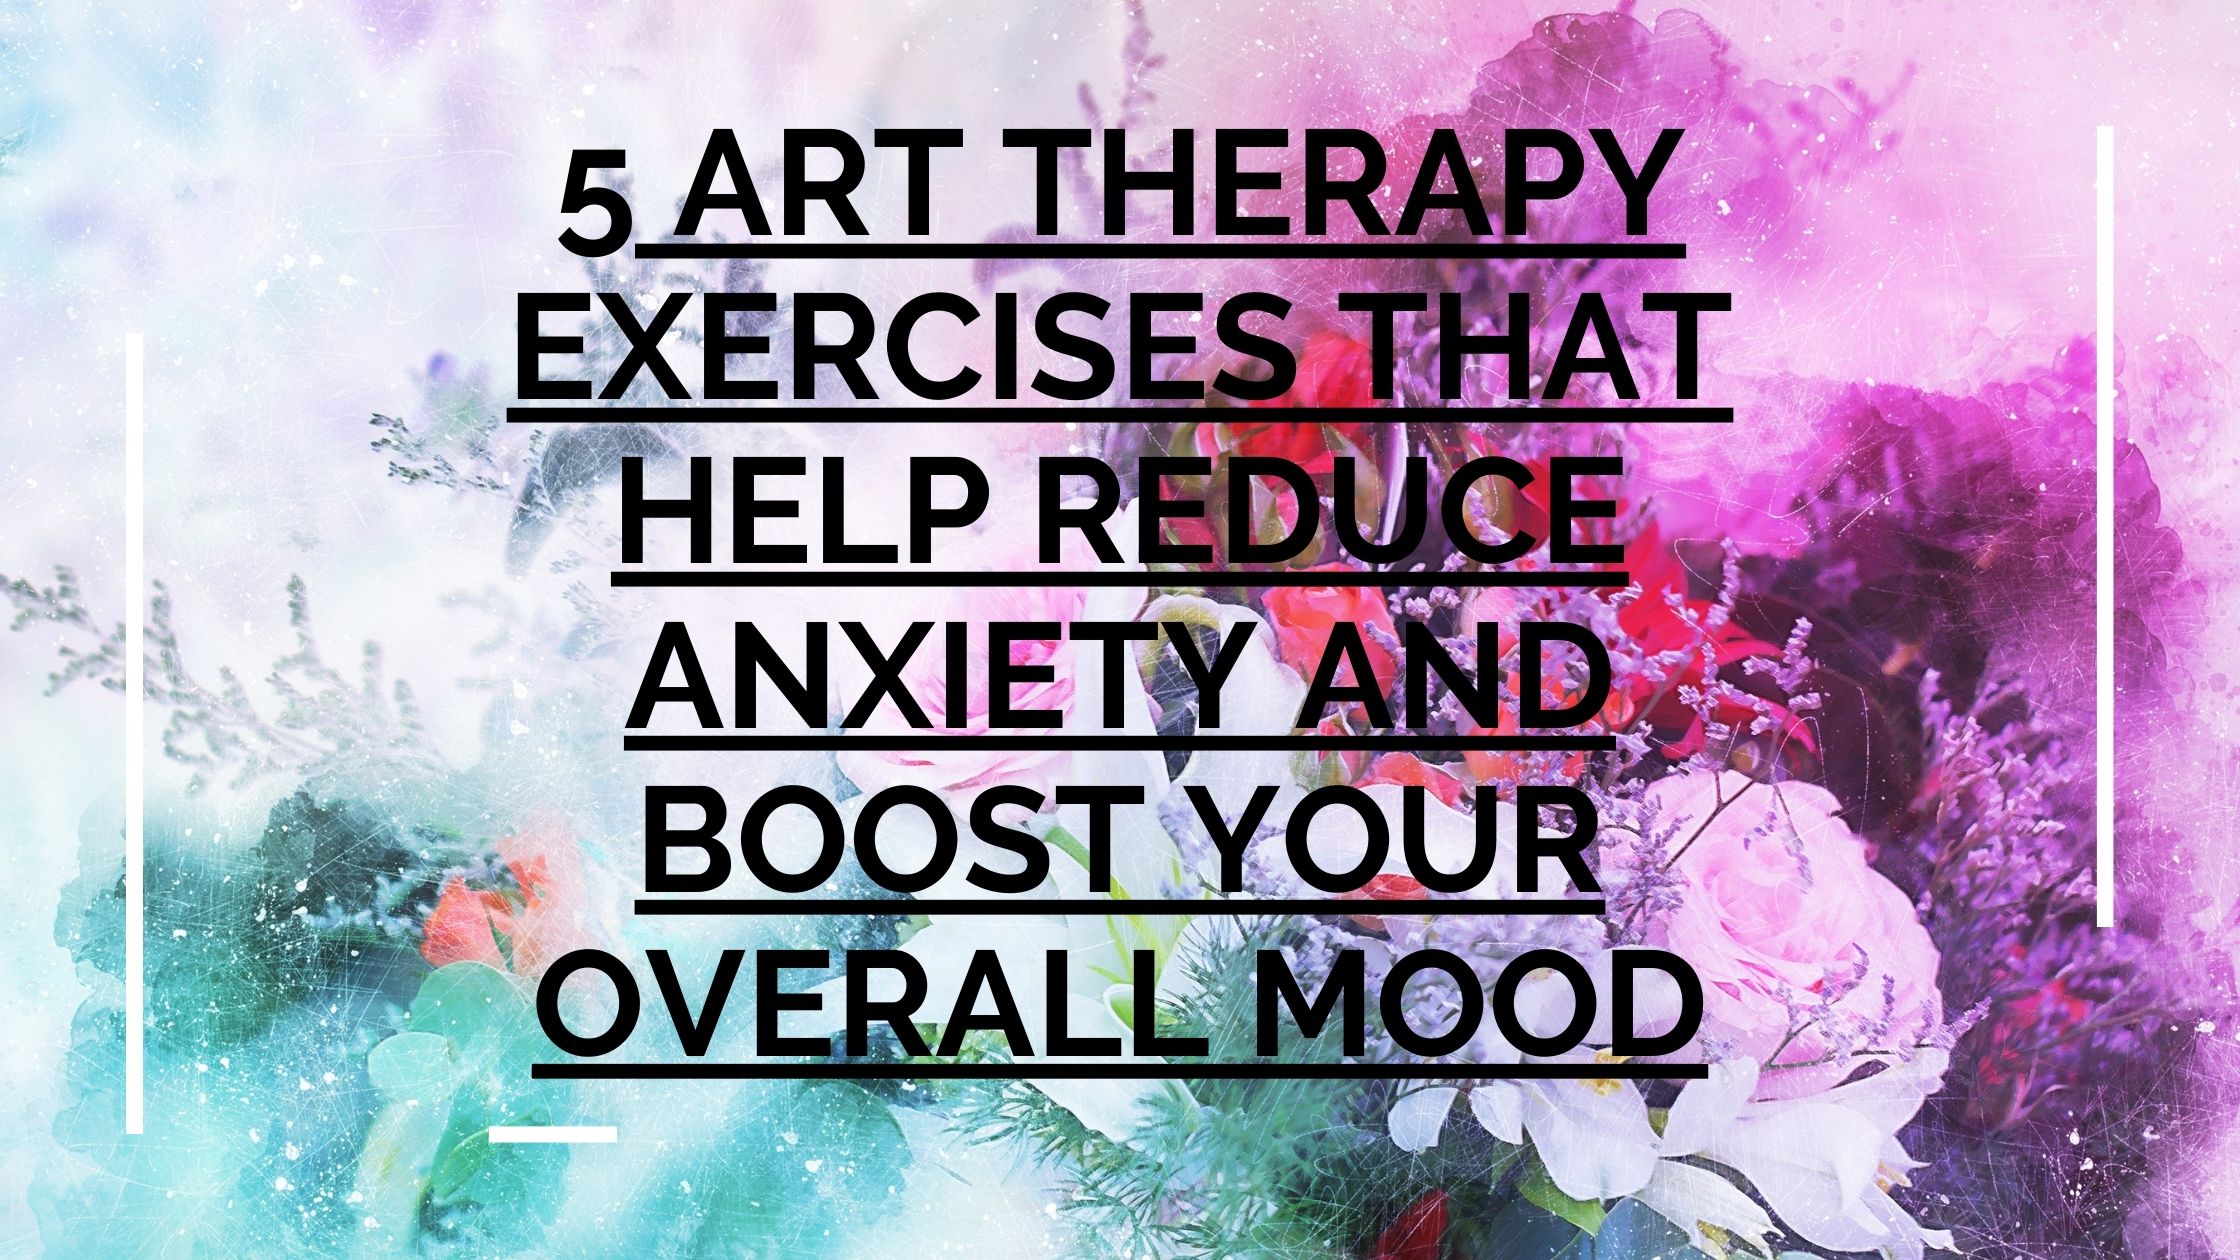 5 Art Therapy Exercises that Help Reduce Anxiety and Boost Your Overall Mood